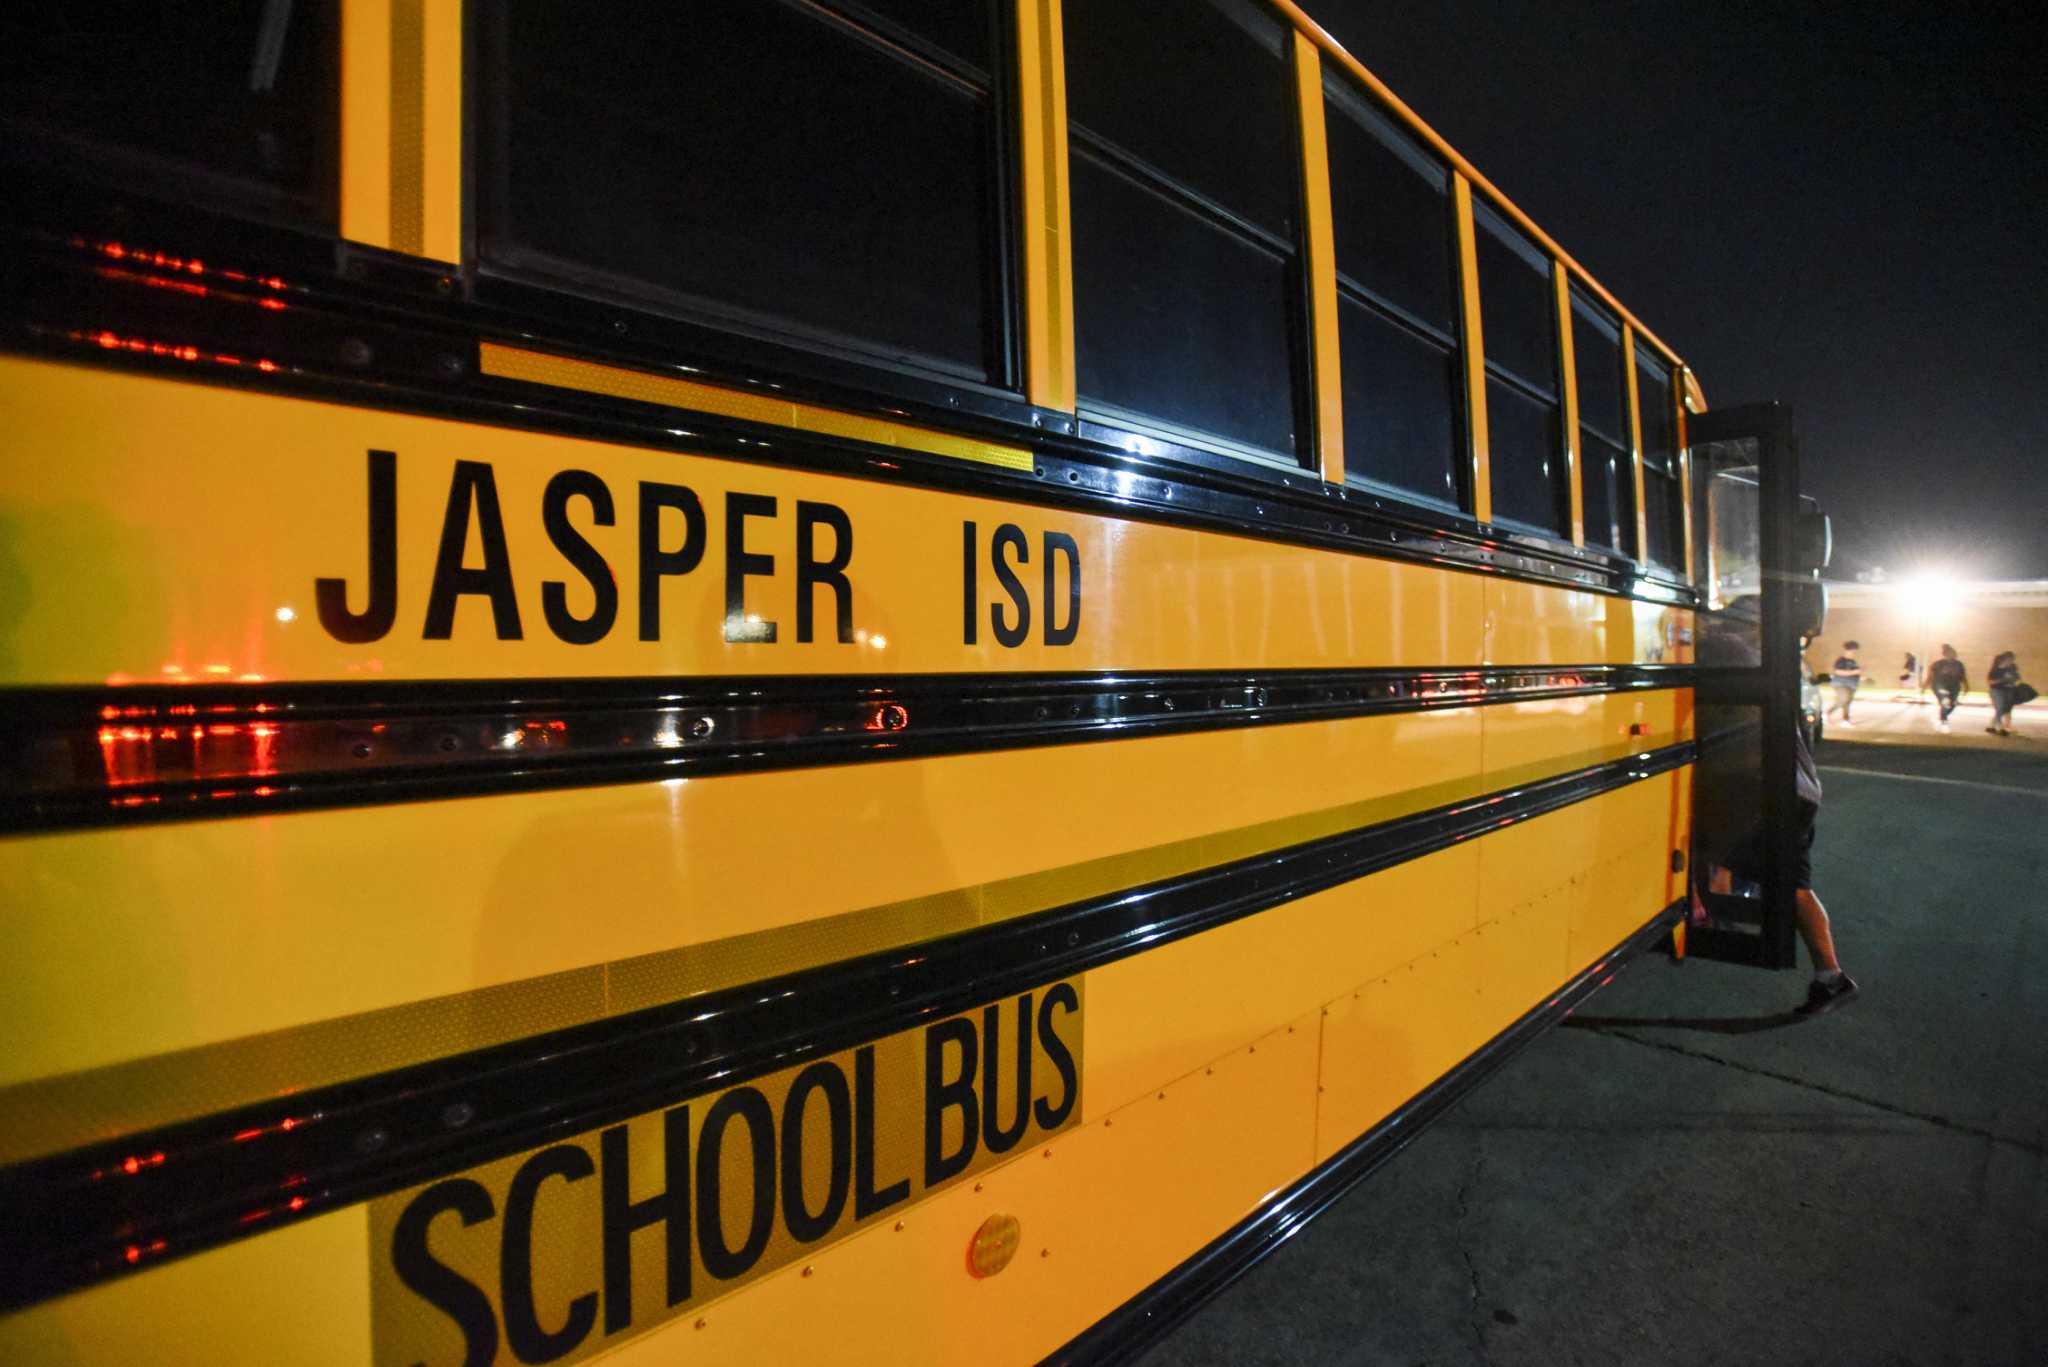 Jasper schools to offer free breakfast, lunch for upcoming year